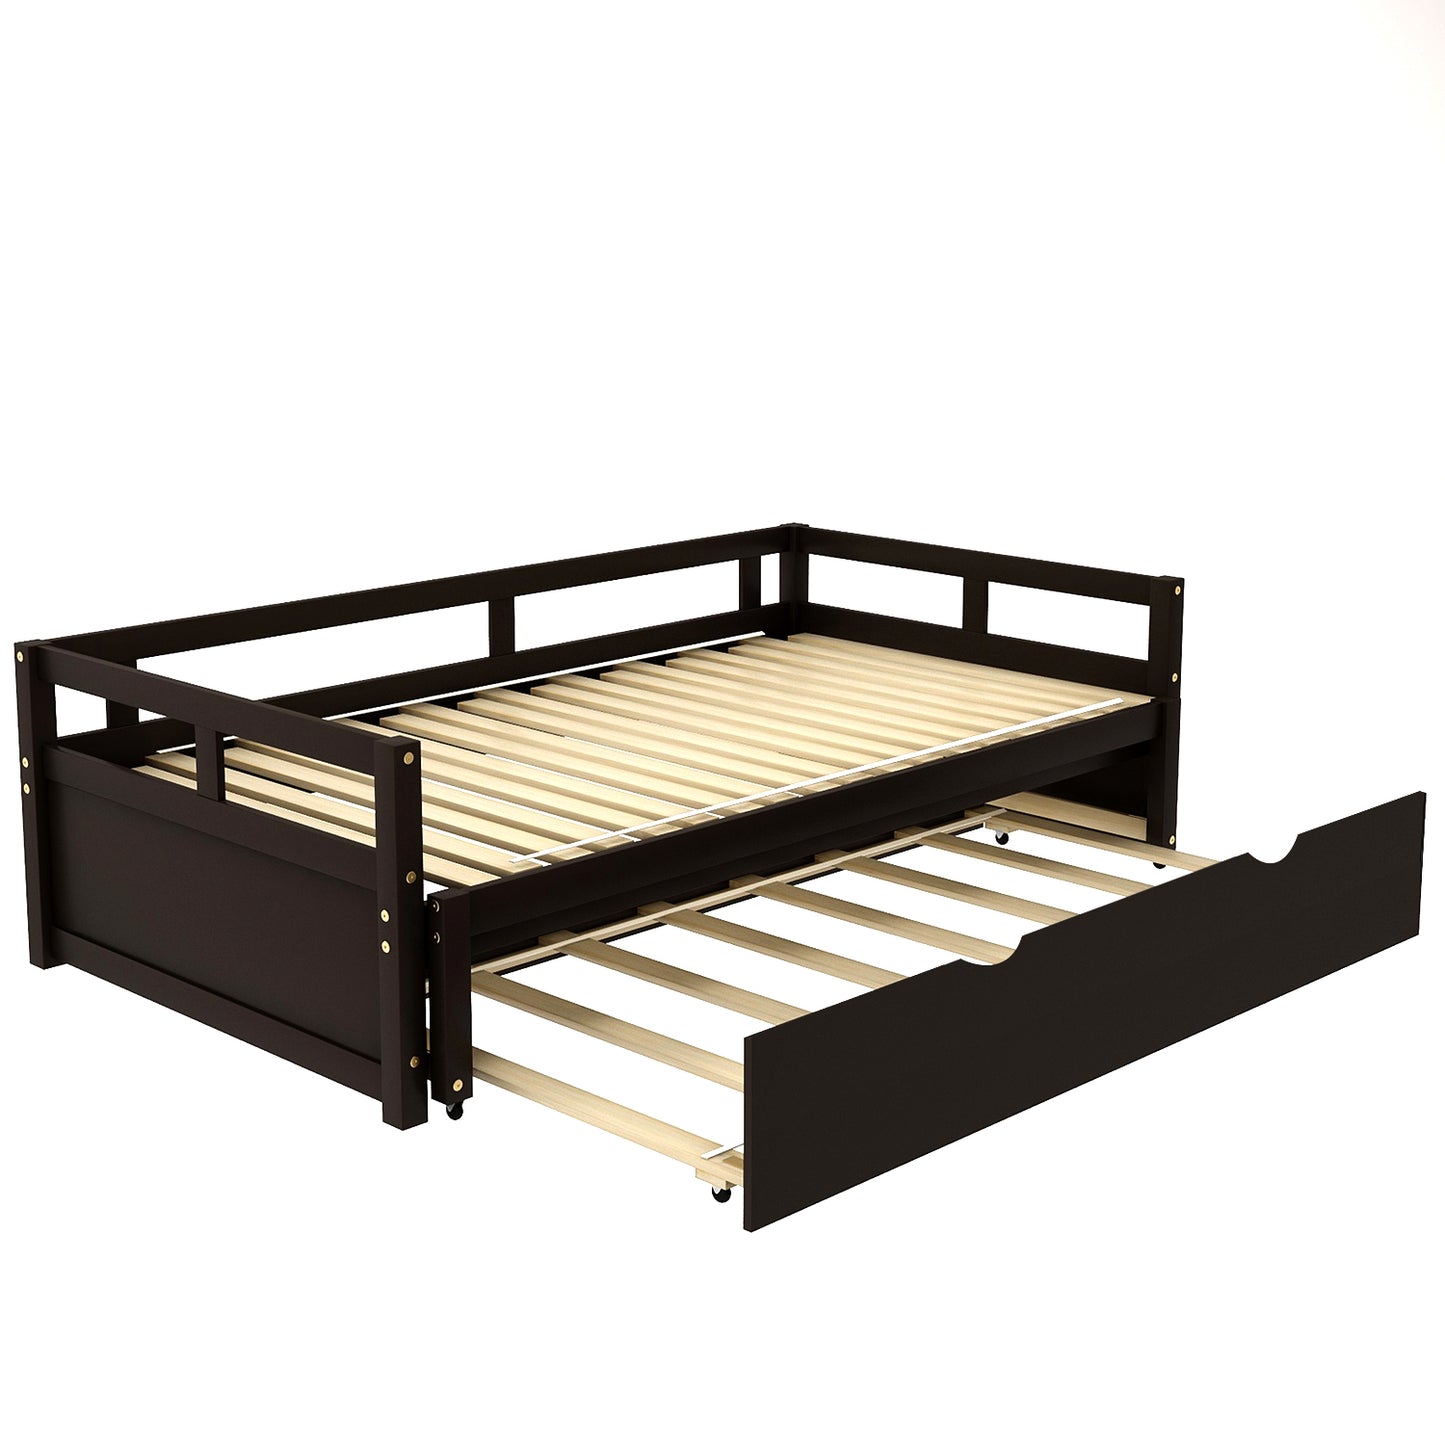 Extending Daybed with Trundle,Wooden Daybed with Trundle, Espresso